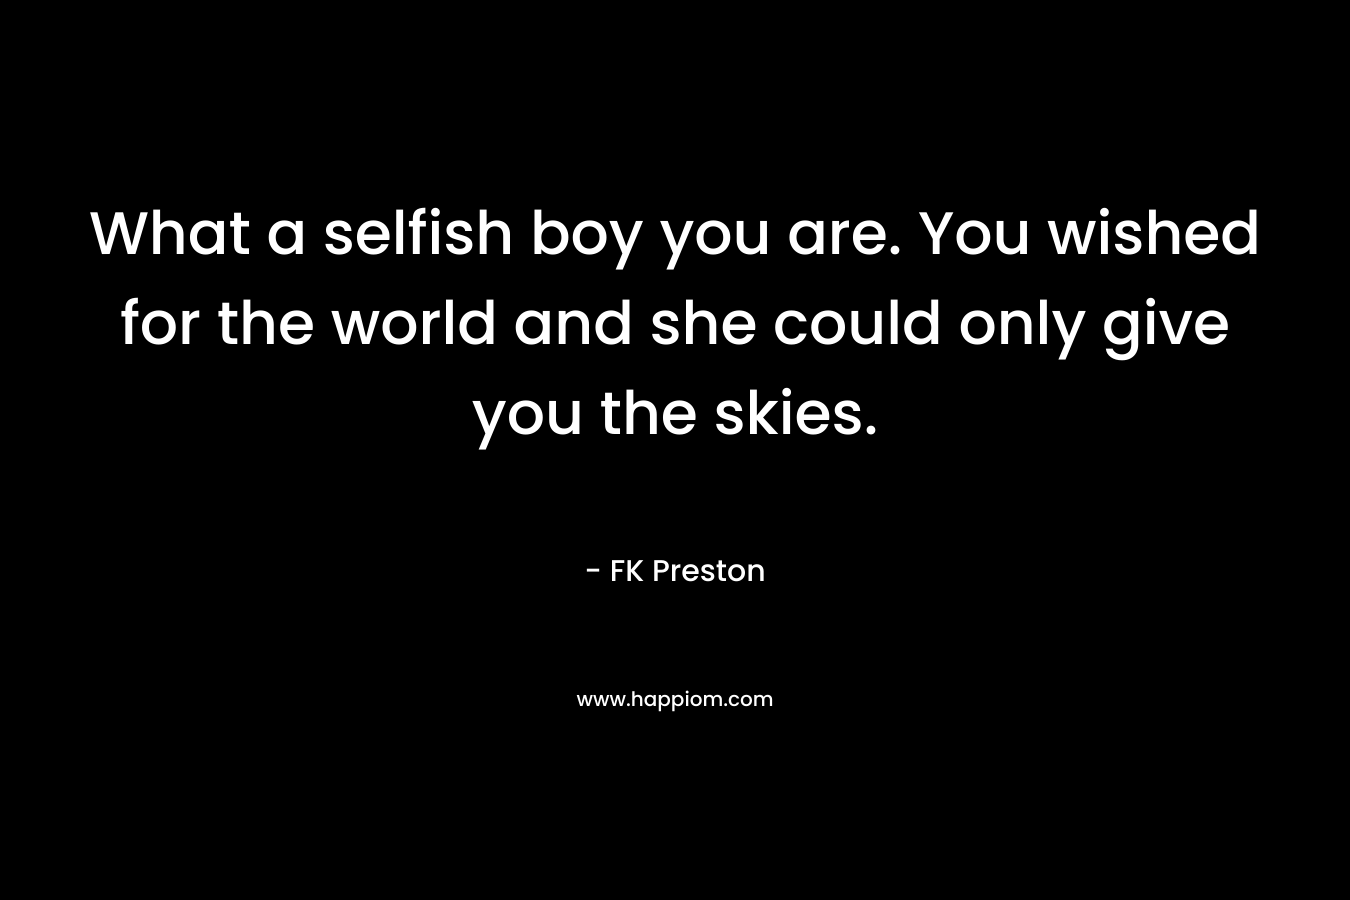 What a selfish boy you are. You wished for the world and she could only give you the skies. – FK Preston